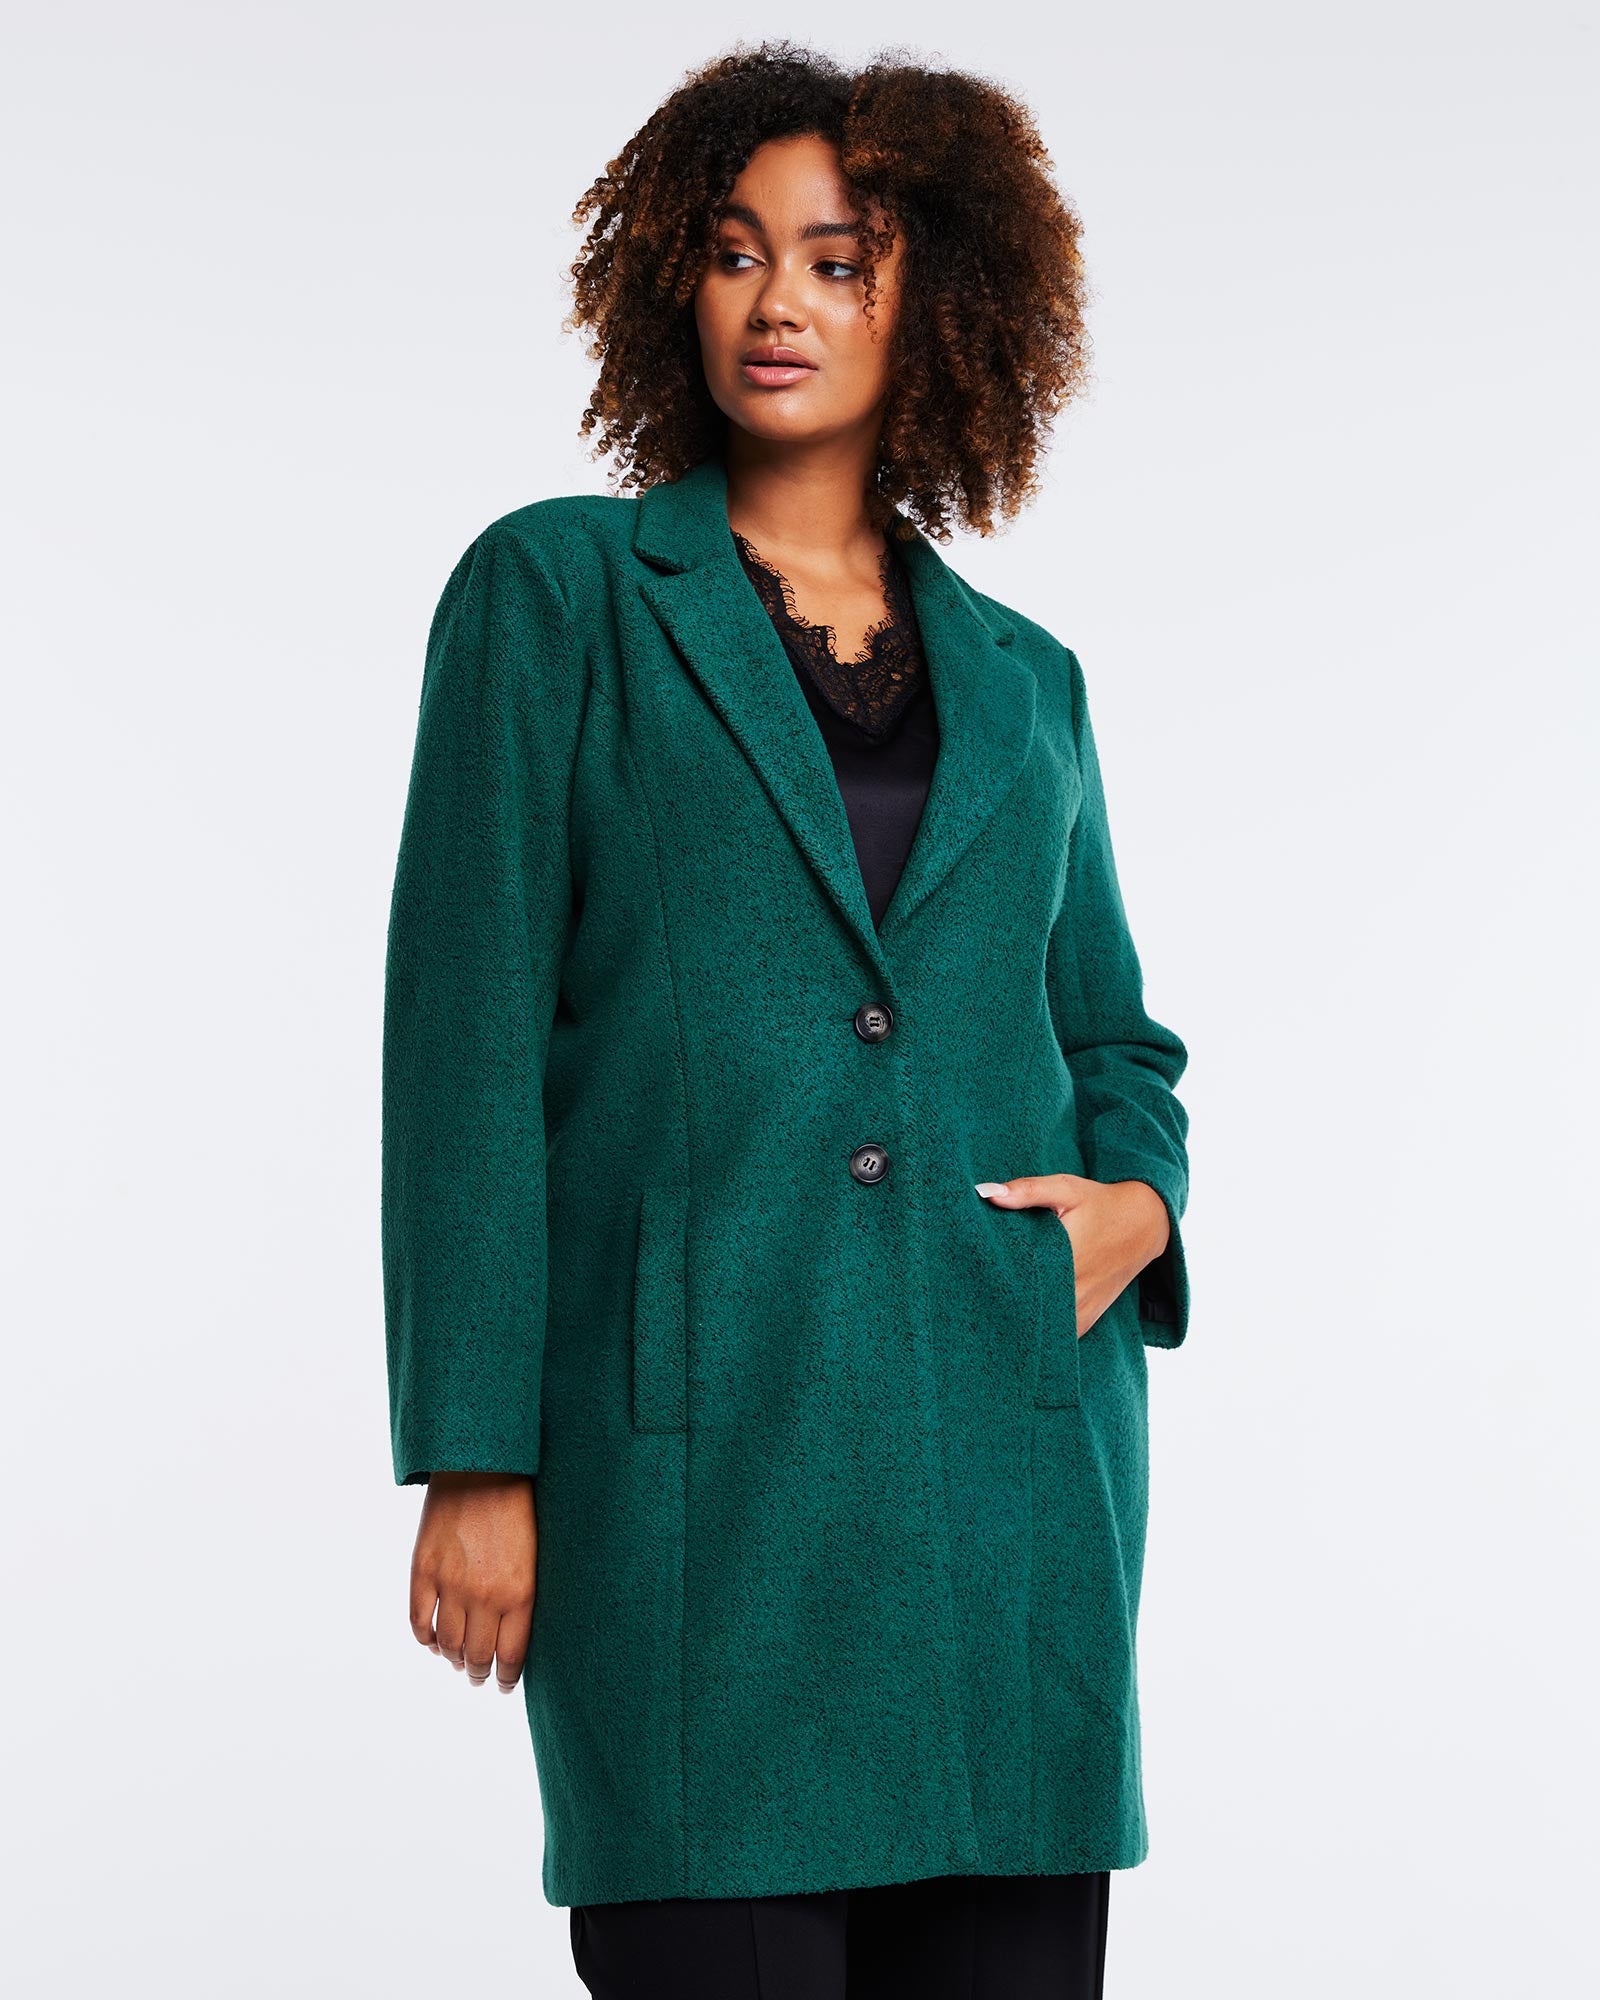 A woman wearing a Wander Green Collared Coat by Estelle and black pants.